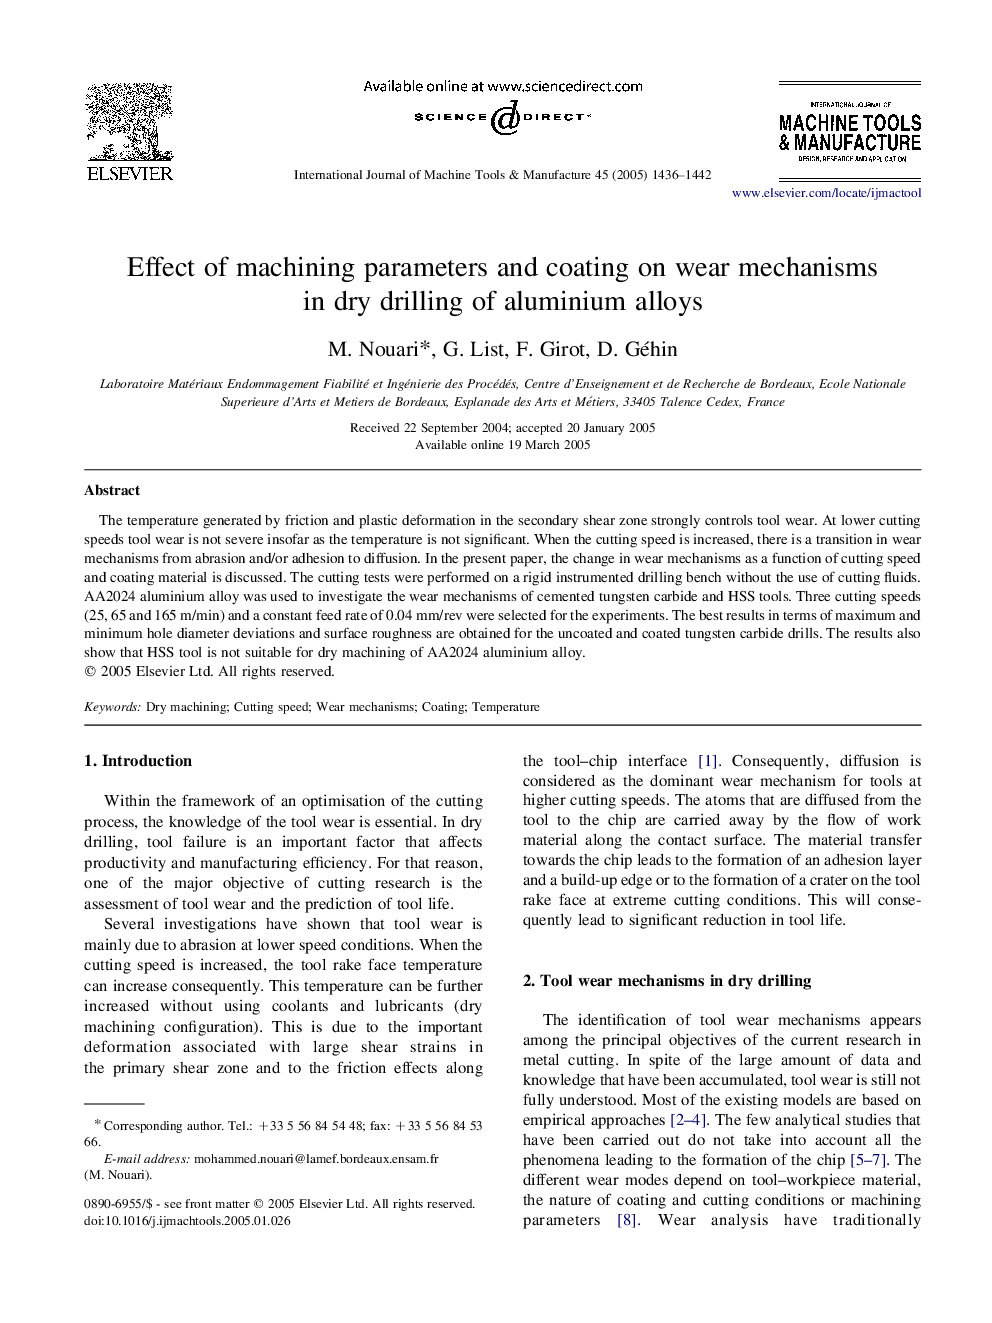 Effect of machining parameters and coating on wear mechanisms in dry drilling of aluminium alloys